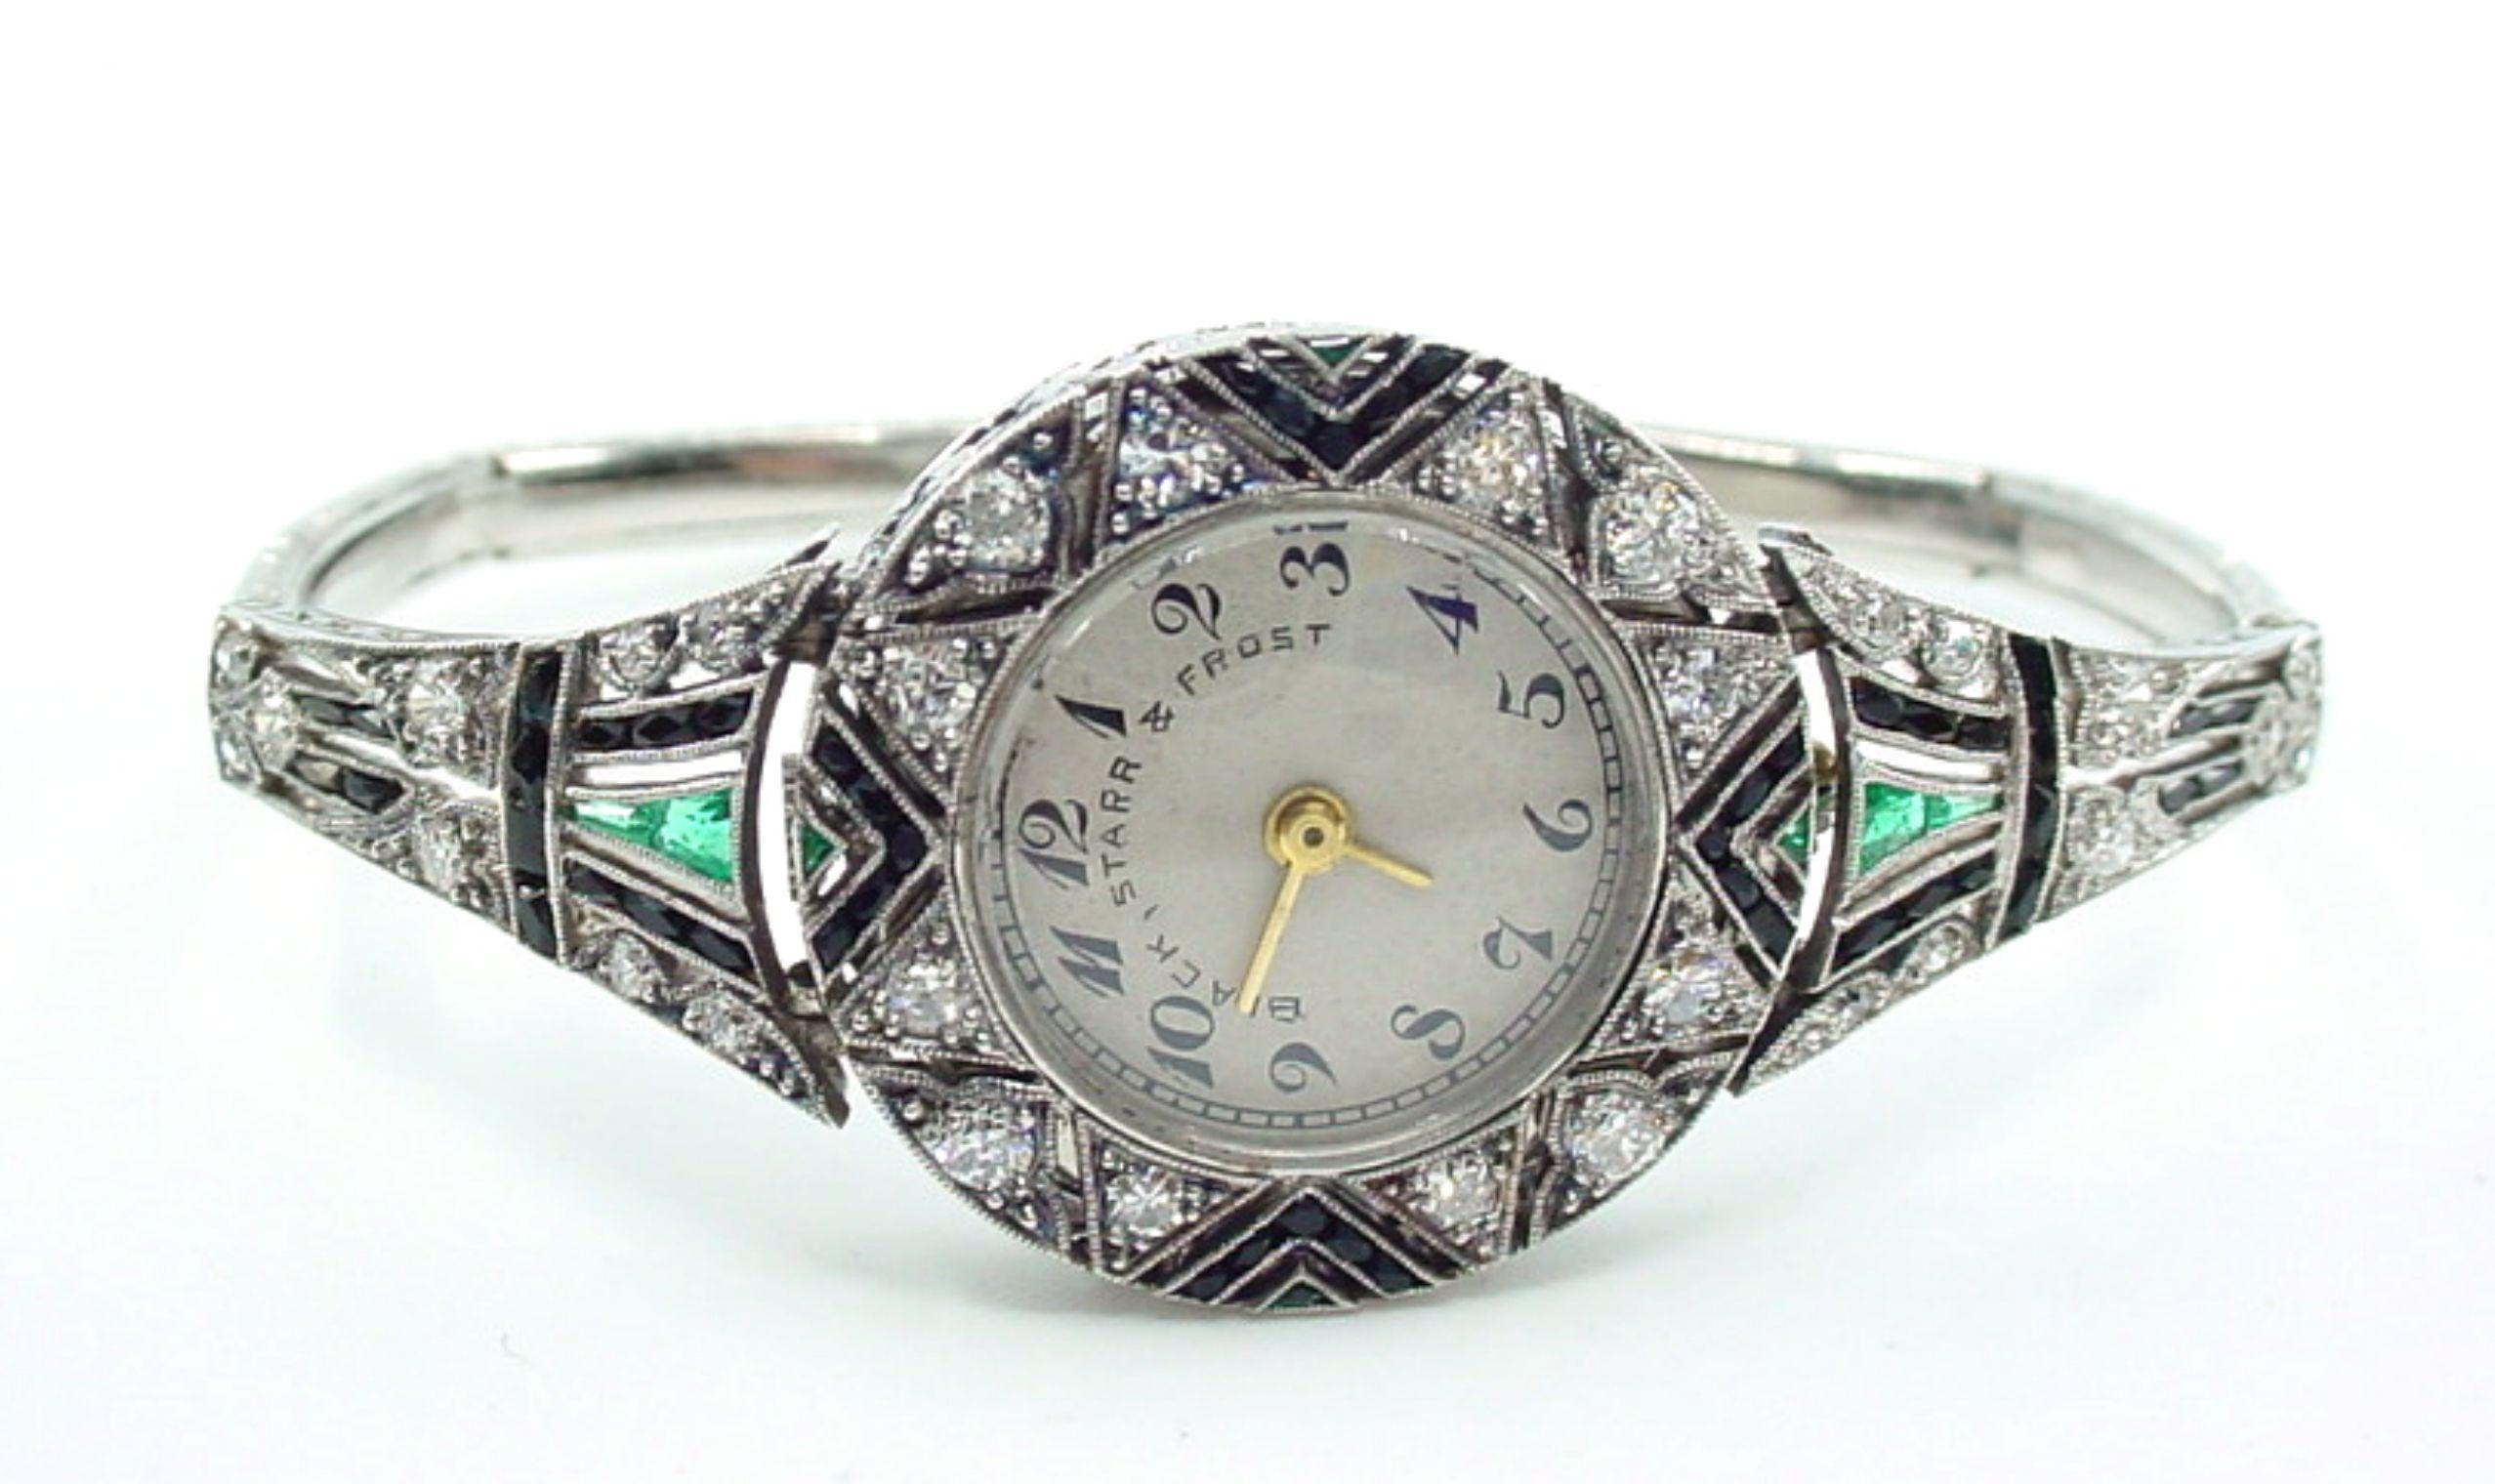 Superb~

In splendid condition, this bracelet watch features calibre cut onyx, earth-mine emeralds, and sparkling diamond housed in an engraved platinum setting.

Please review the details of this extraordinary example:

CASE
Brand: Black, Starr and